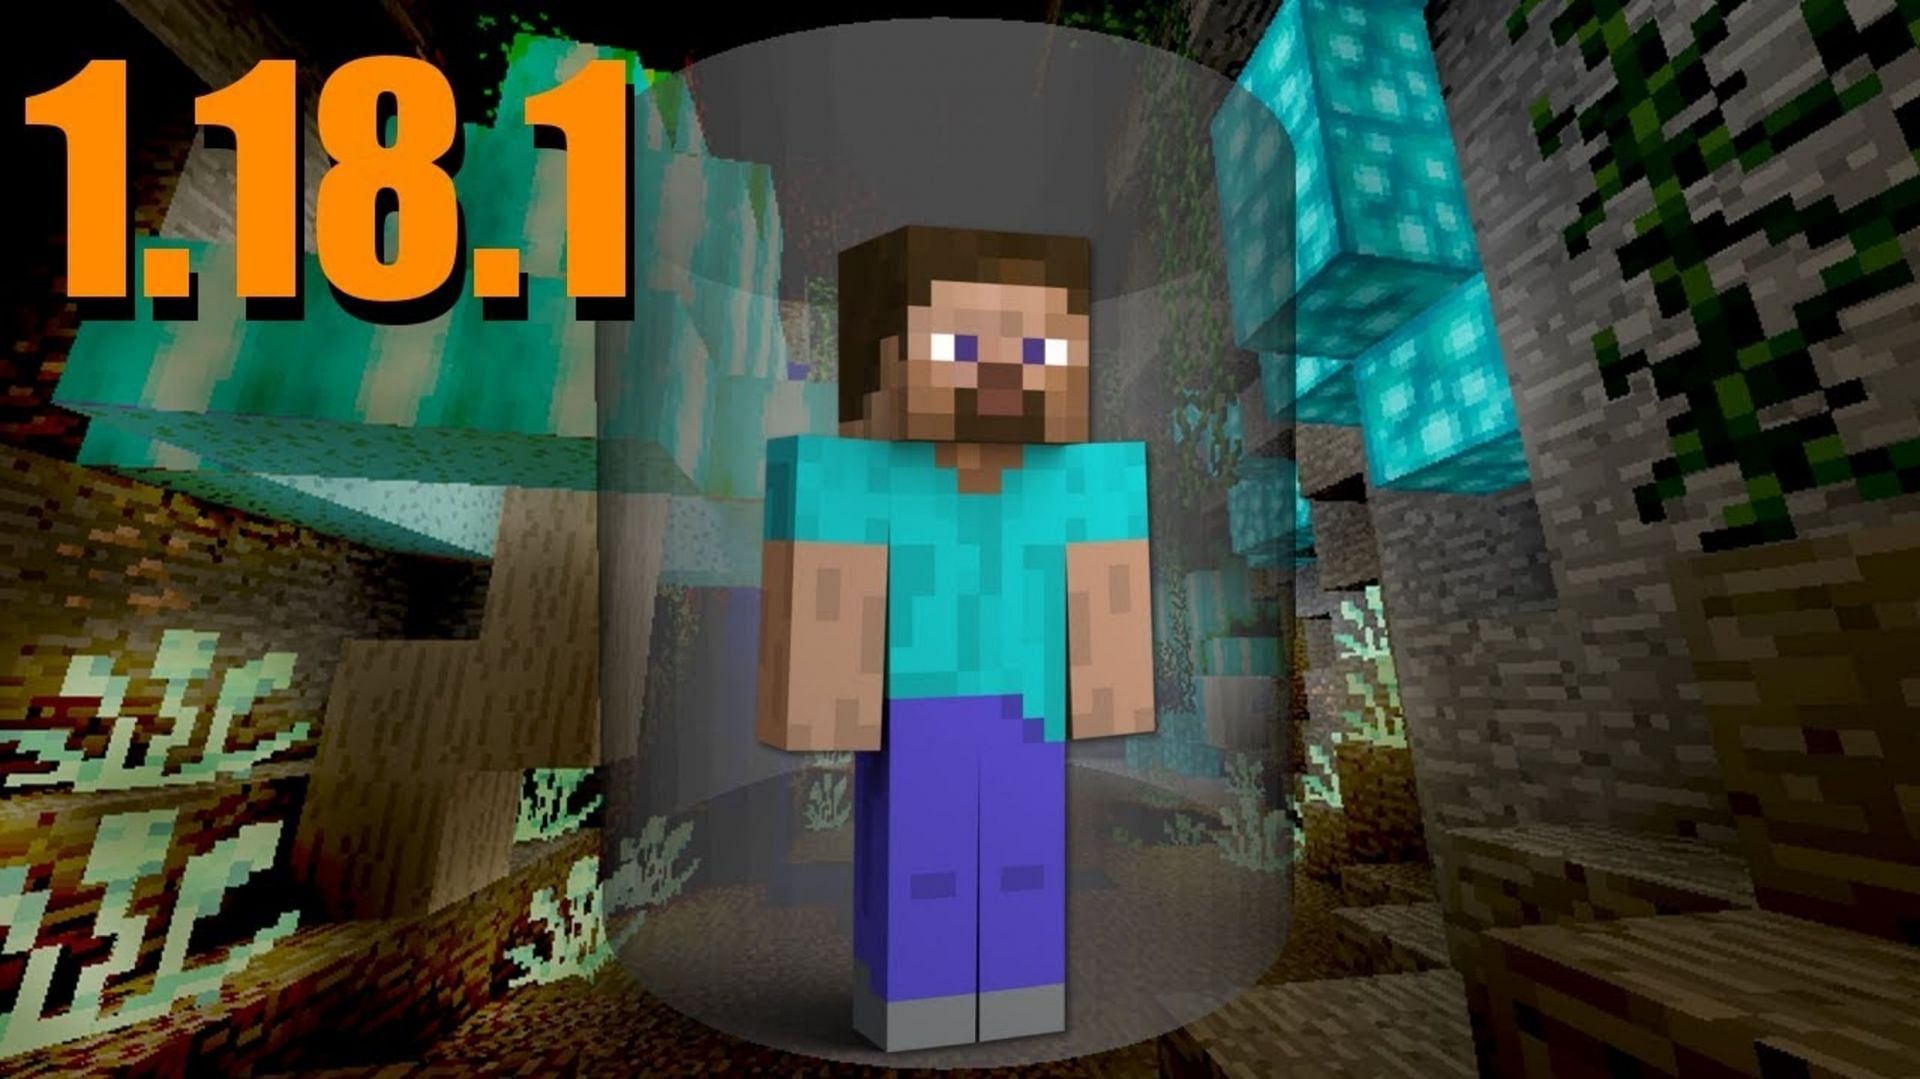 Version 1.18.1 applies bug and security fixes leftover from Minecraft 1.18 (Image via Mojang)